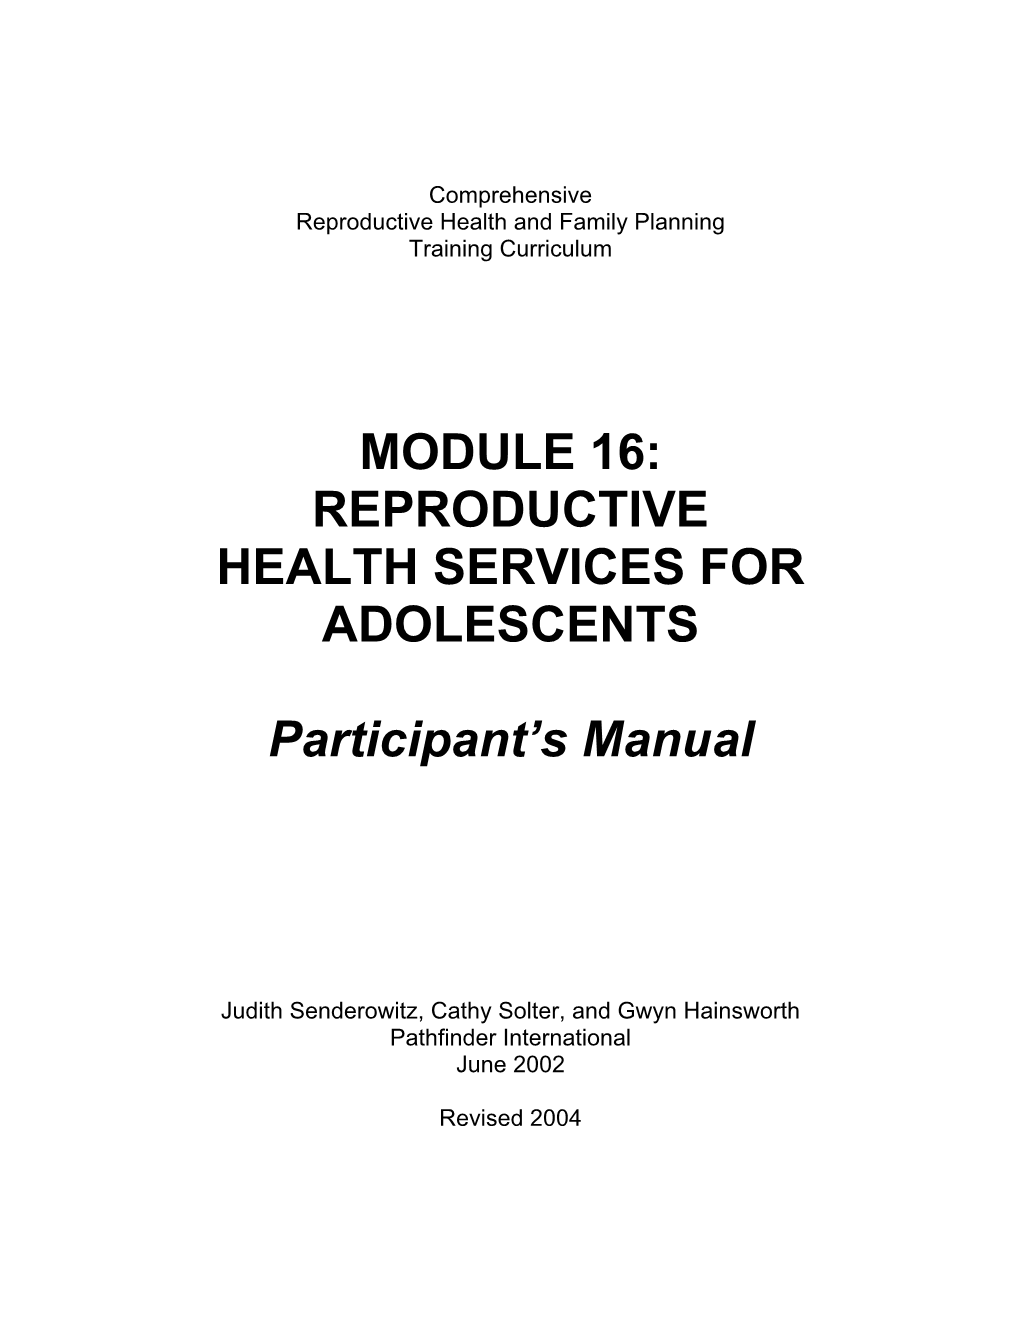 Module 16: Reproductive Health Services for Adolescents